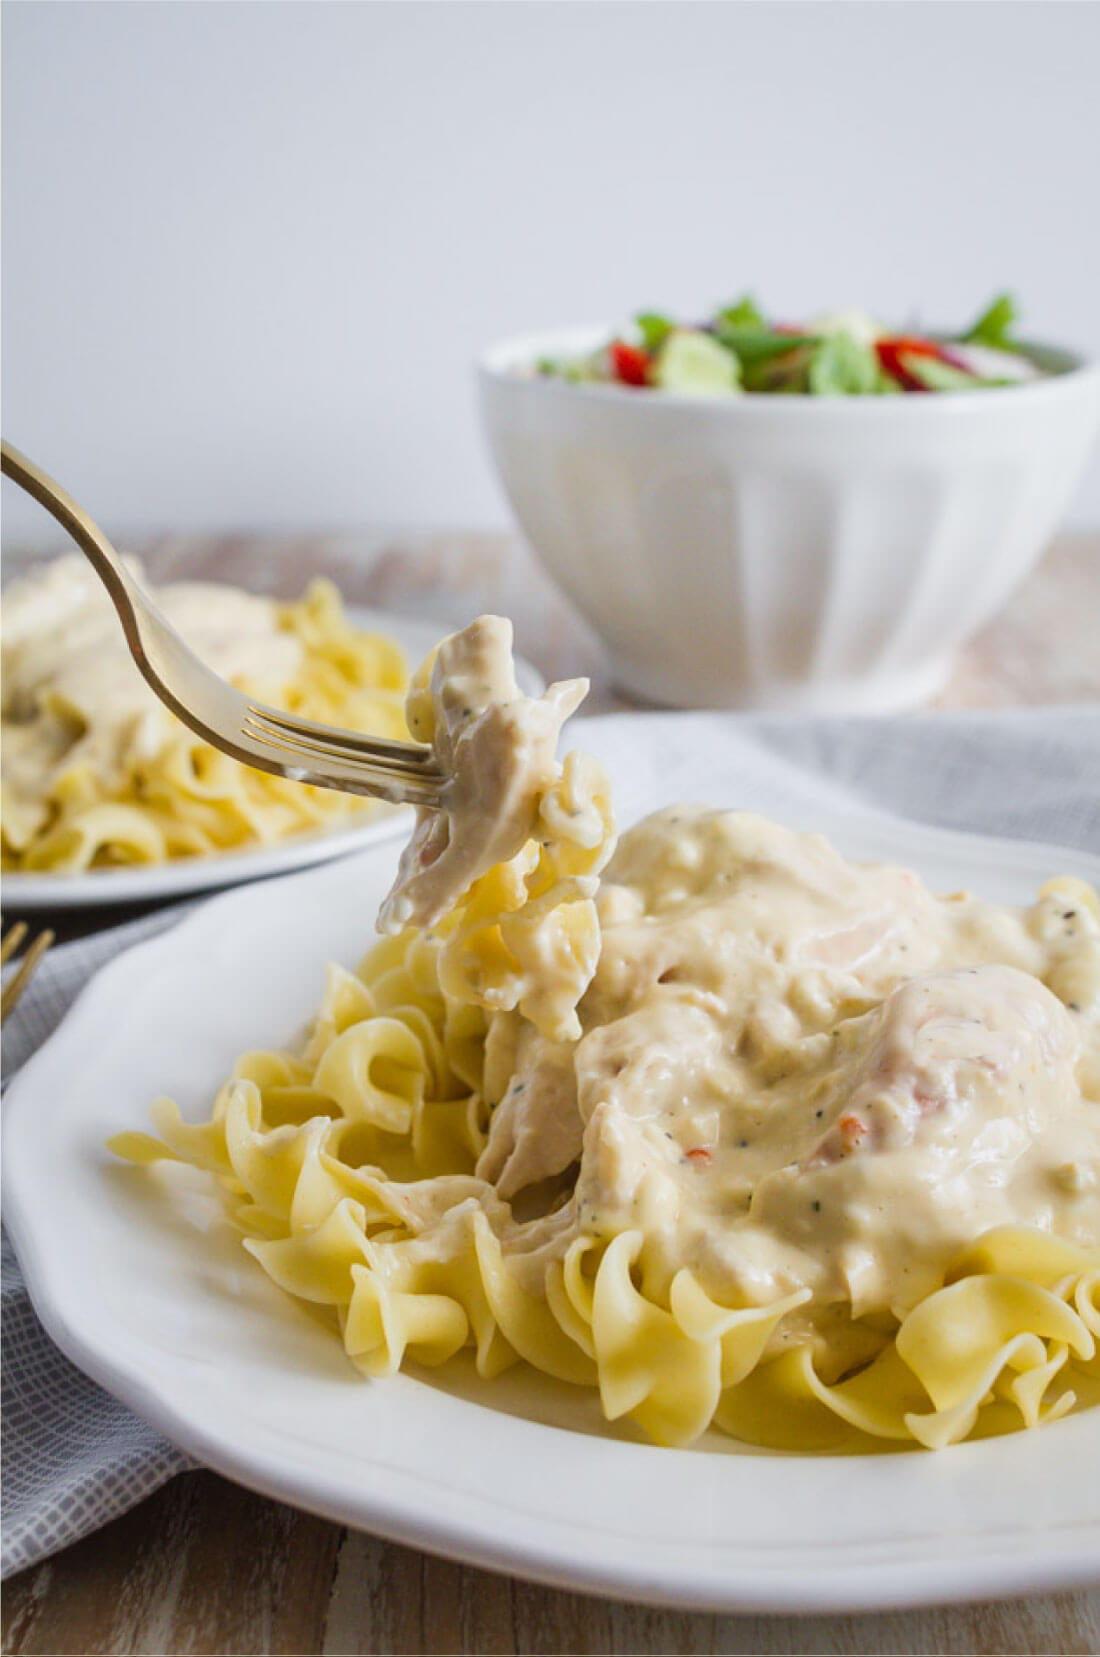 Slow Cooker Zesty Italian Chicken - one of our family favorites. from www.thirtyhandmadedays.com